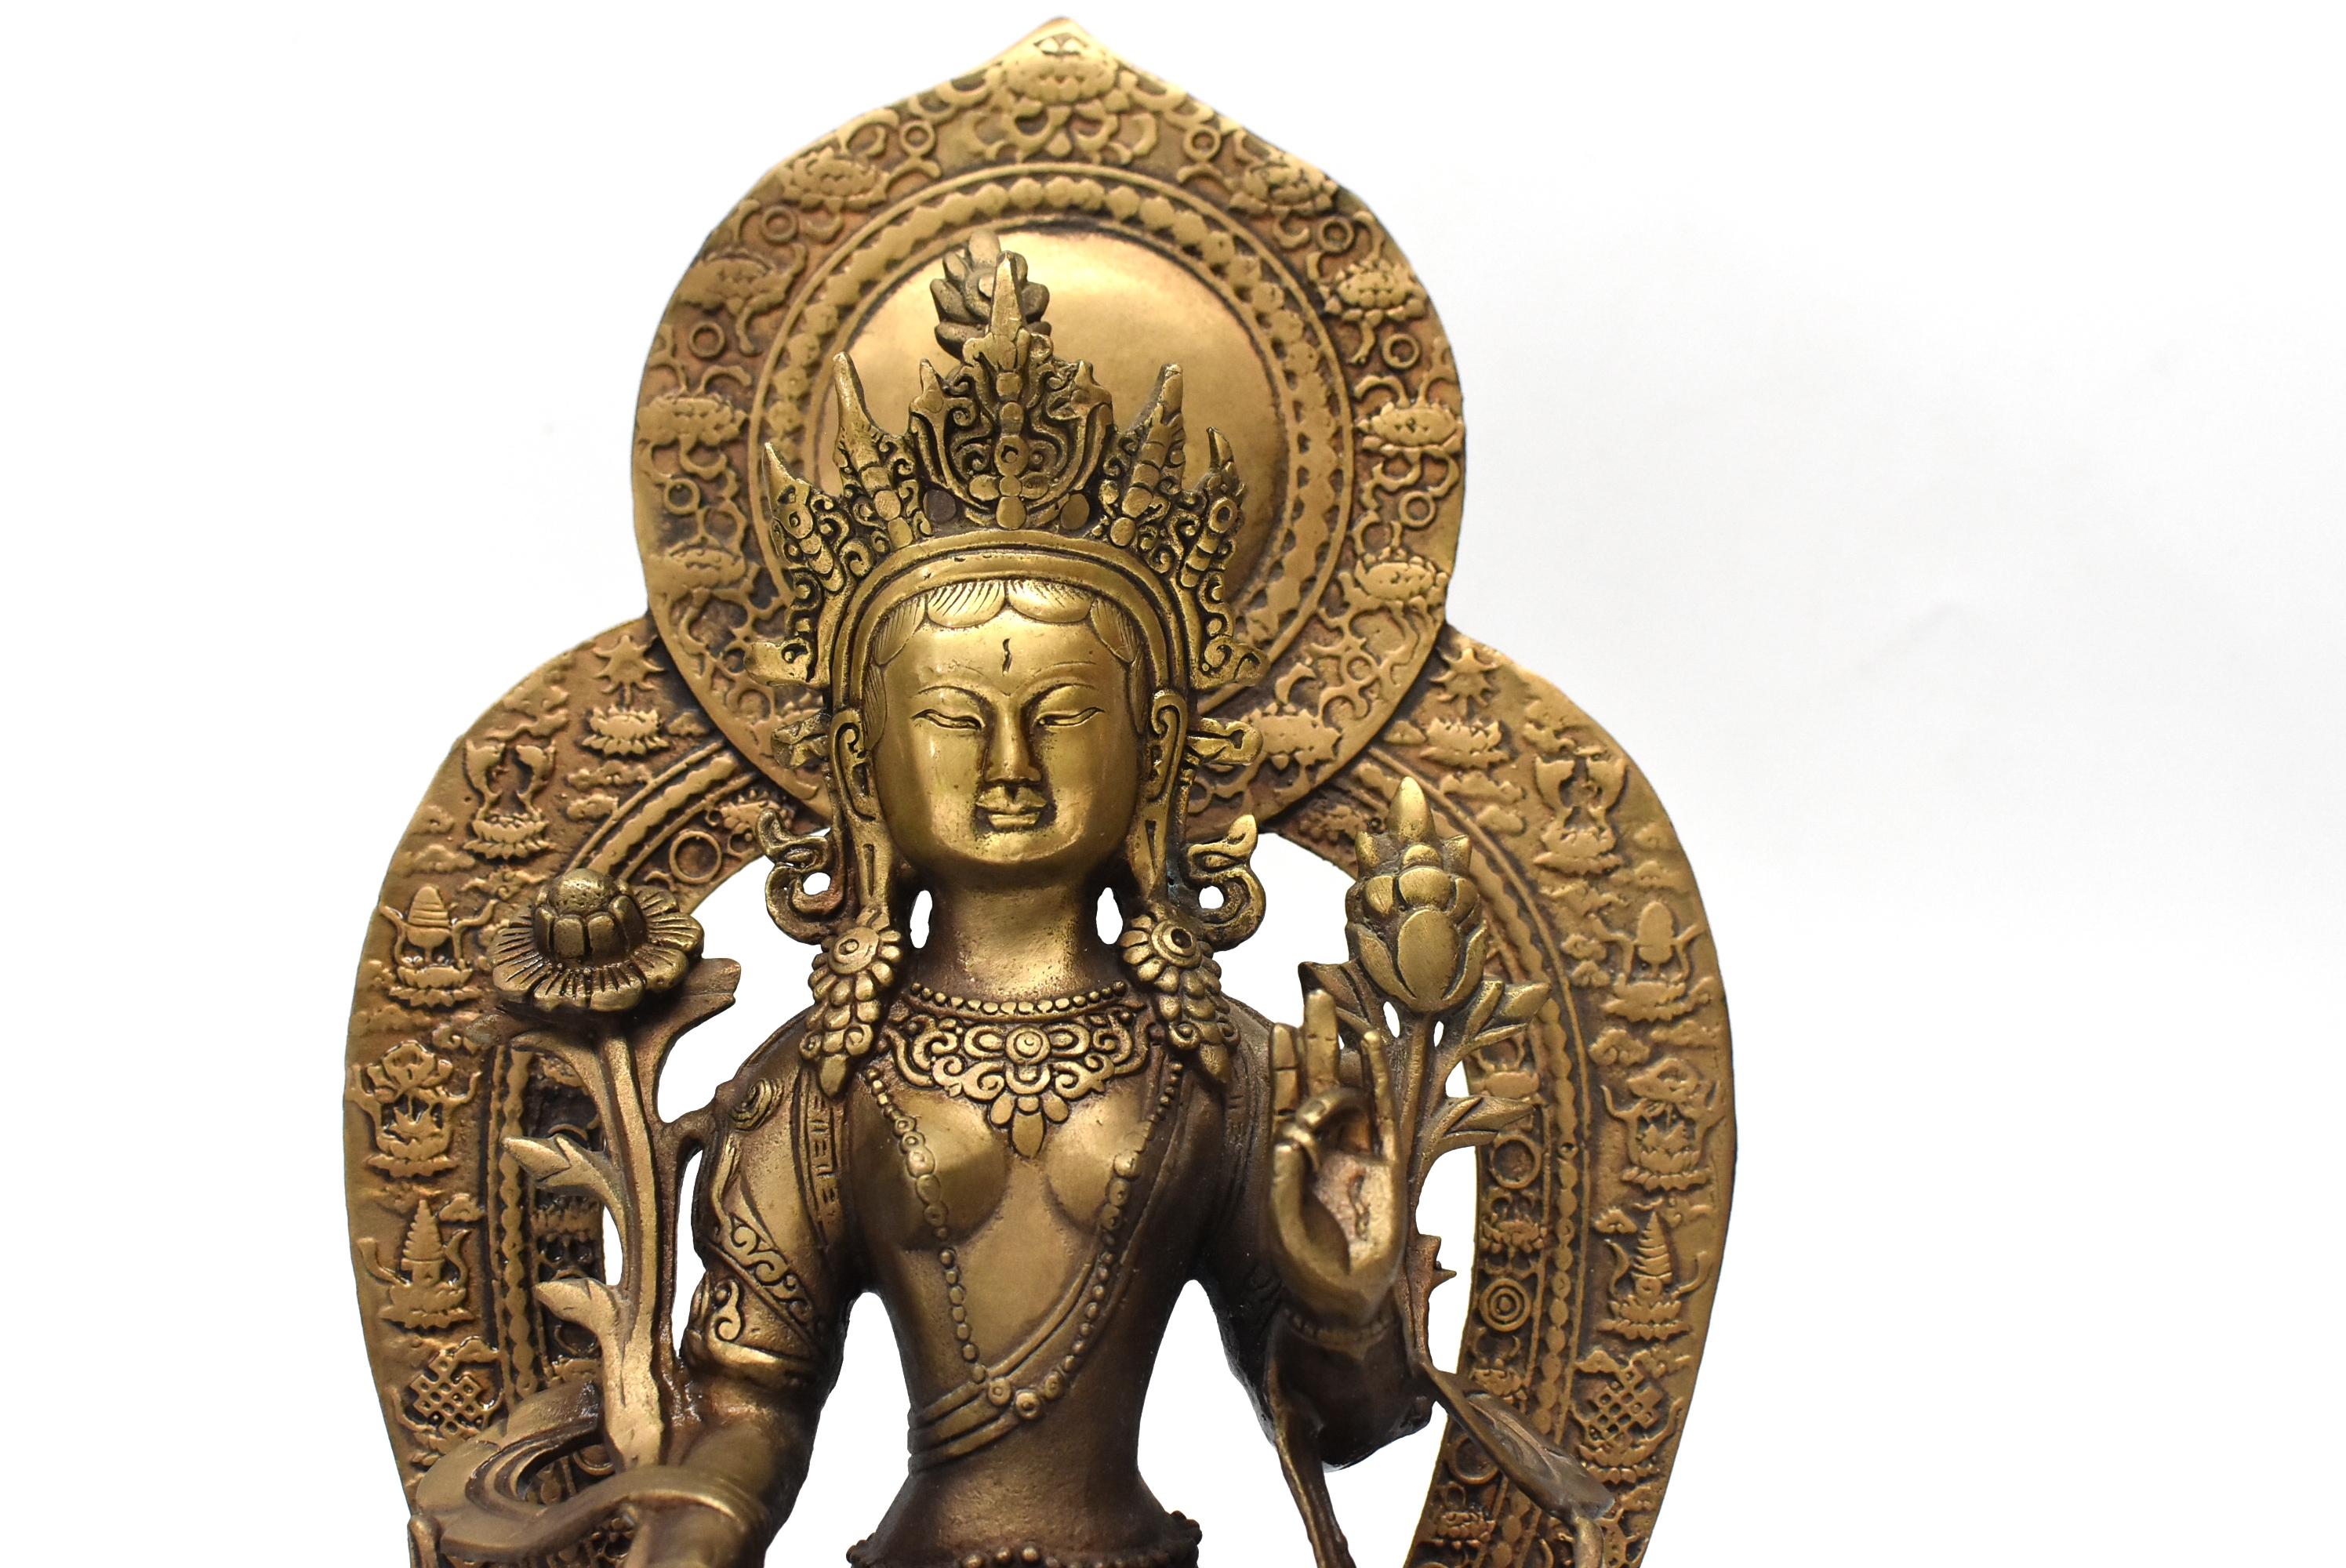 A beautiful, very substantial, antique brass Tibetan white Tara. The Tara is seated on an elevated lotus throne, she wears a decorated crown and pearl lariats, is surrounded by flowers and wrapped in a fluid sash. A removable back halo with embossed